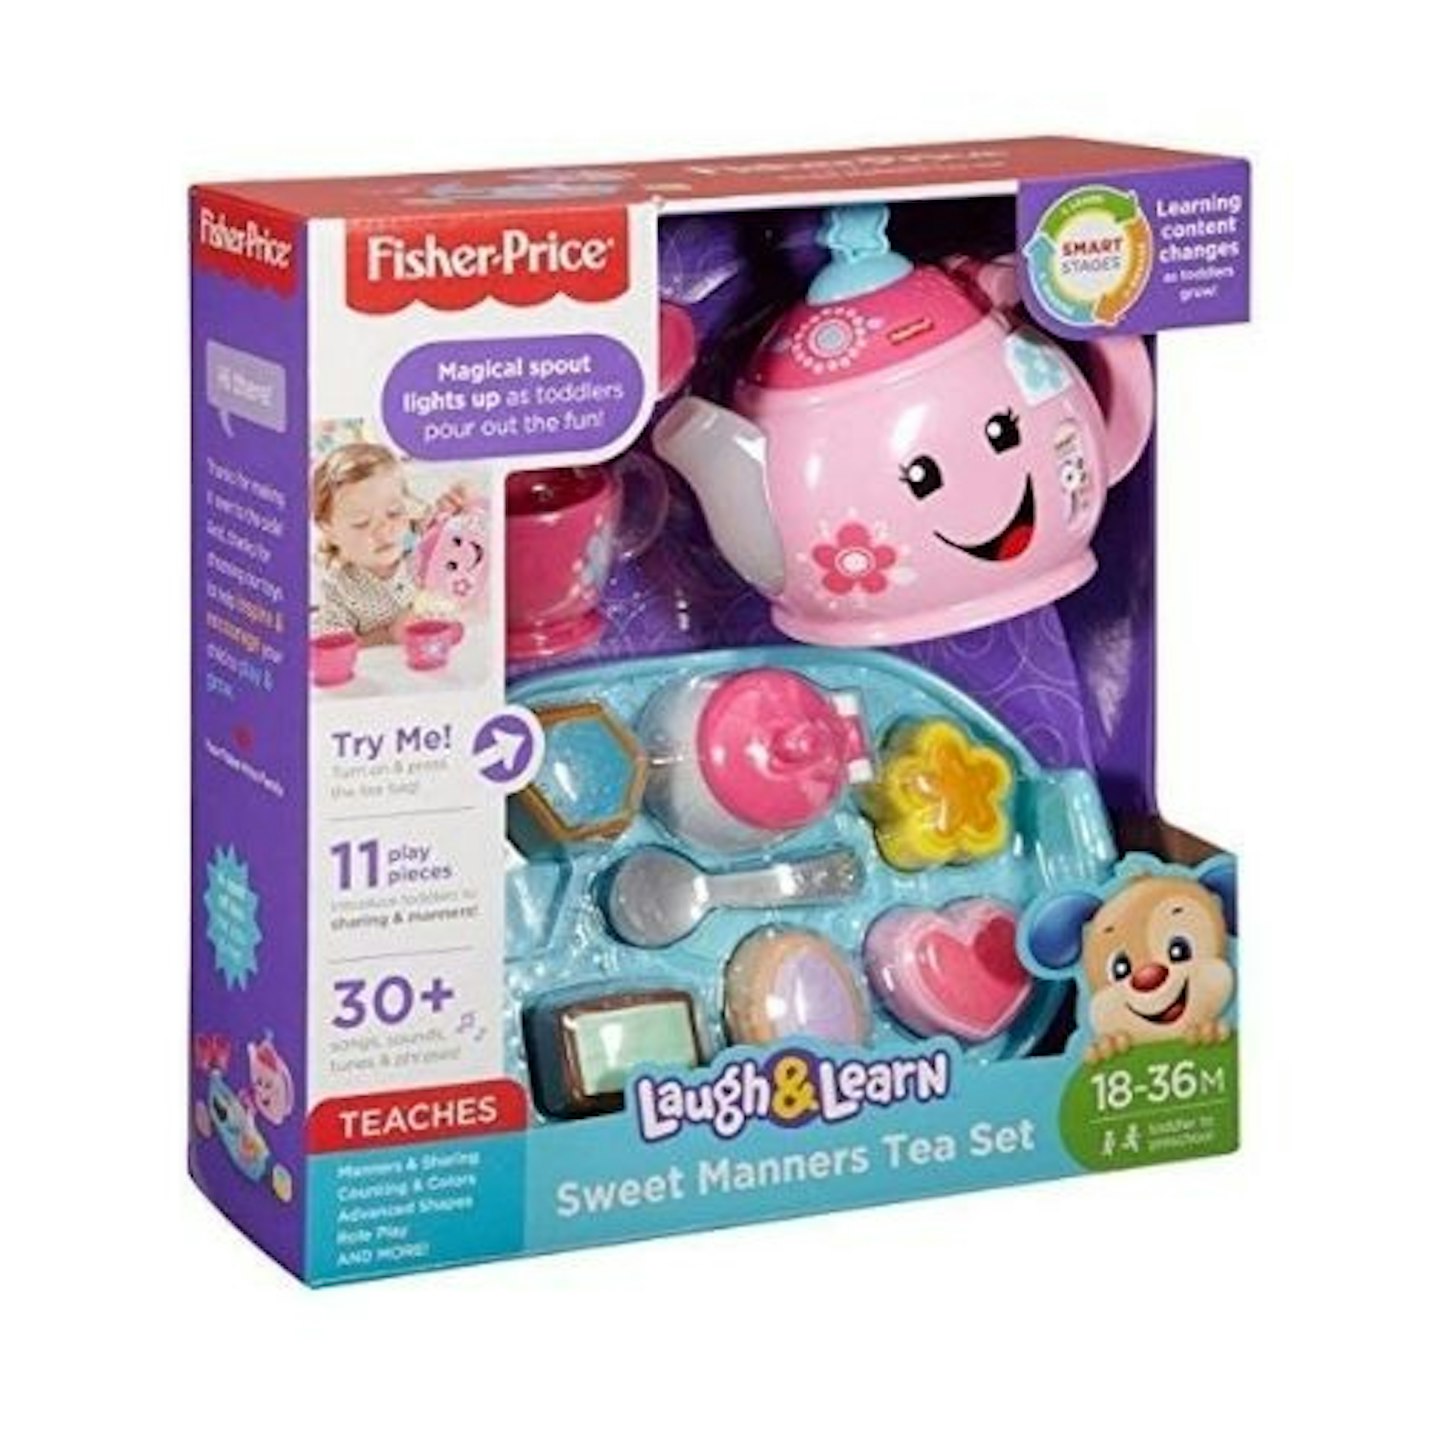  Fisher-Price DYM76 Laugh and Learn Sweet Manners Tea Playset - musical toys for toddlers